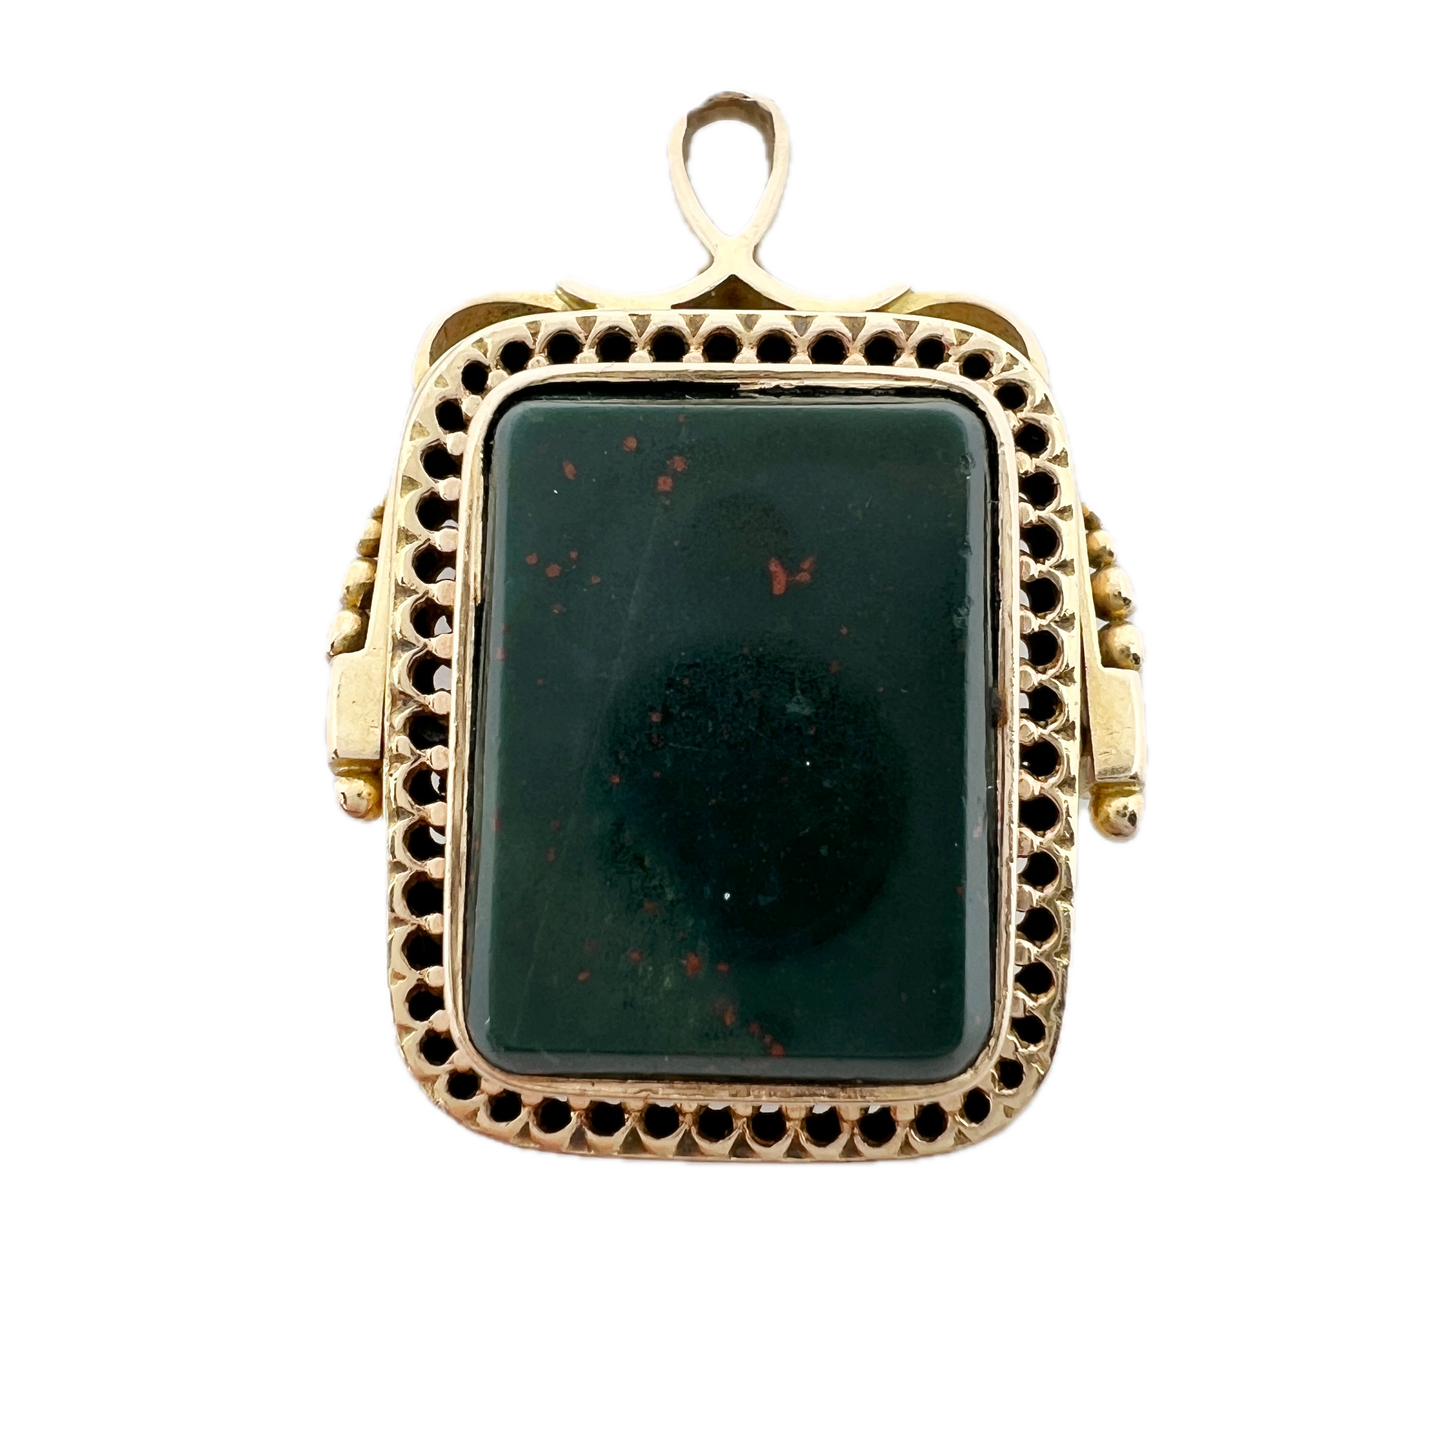 Antique c year 1900. 18k Gold Bloodstone Agate Seal Fob Pendant.